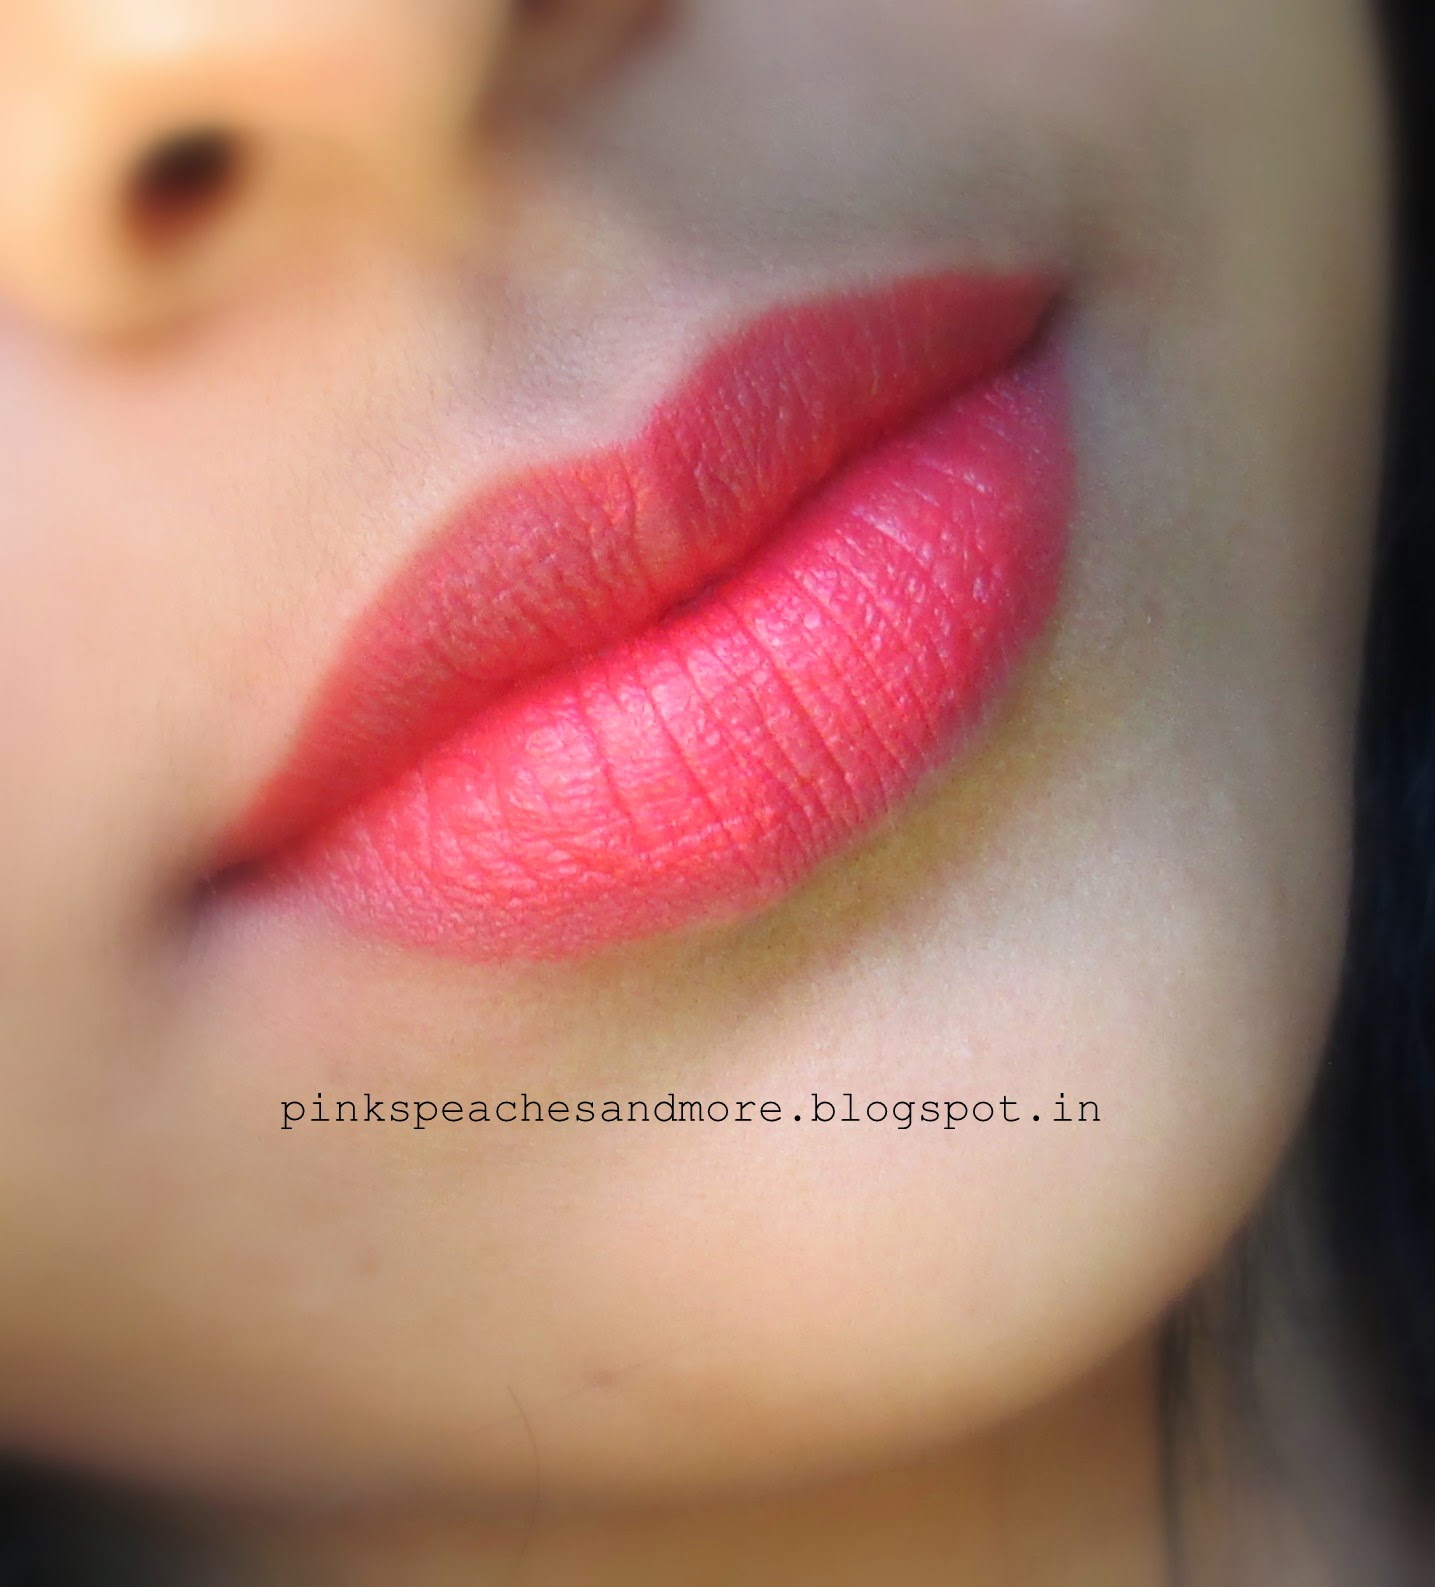 Buy Lakme Absolute Sculpt Hi-Definition Matte Lipstick - Coral Flare Online  in India